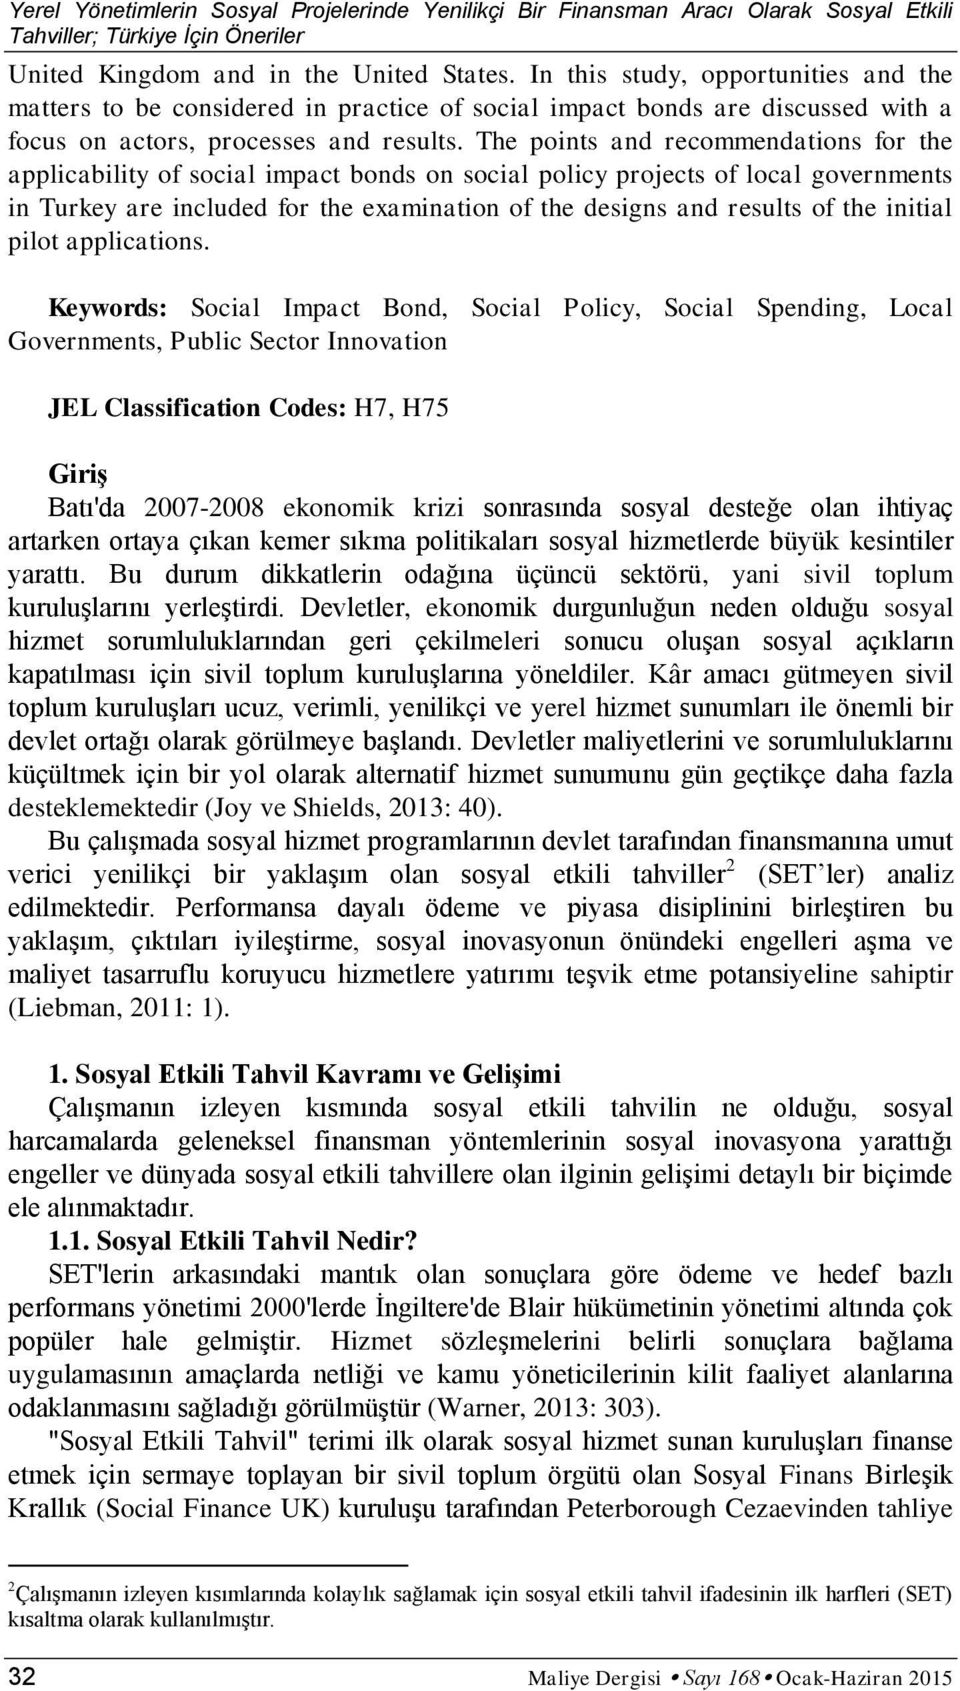 The points and recommendations for the applicability of social impact bonds on social policy projects of local governments in Turkey are included for the examination of the designs and results of the